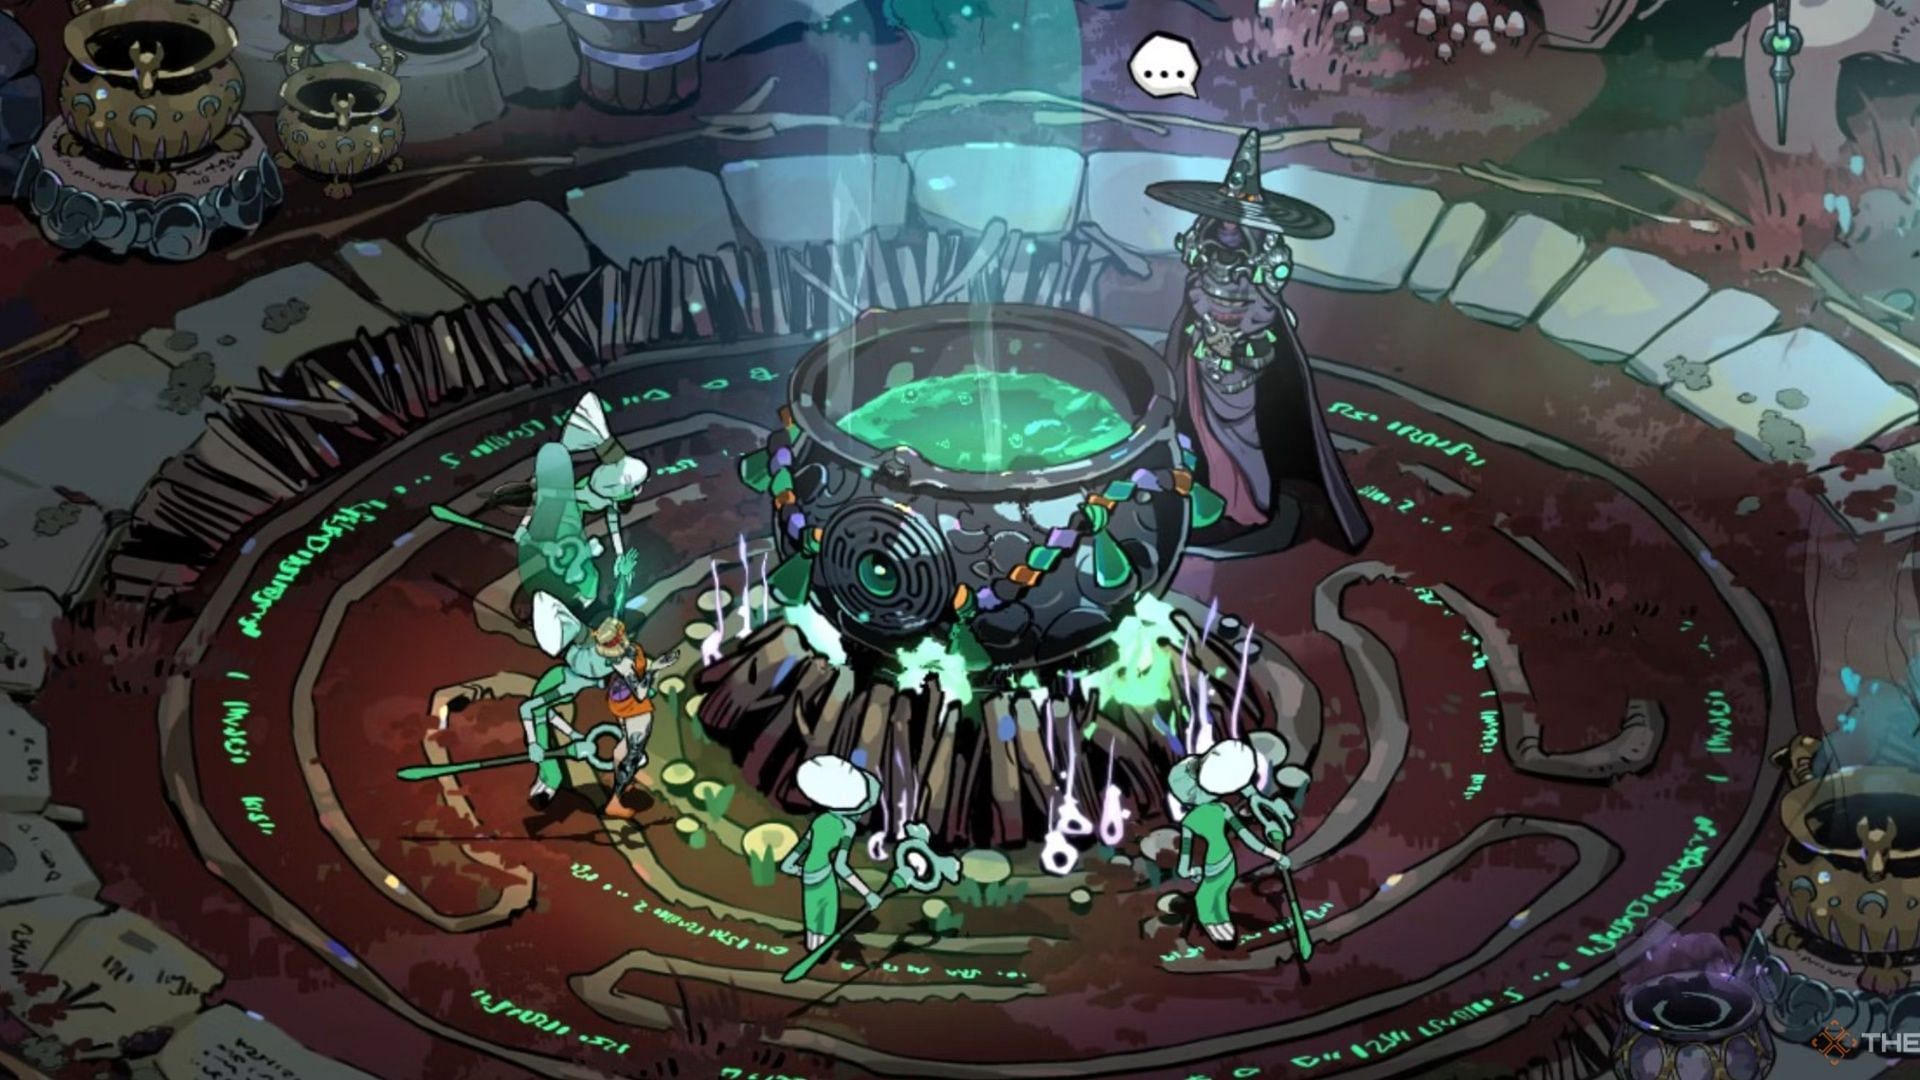 Make the Permeation of Witching-Wards (Image via Supergiant Games)